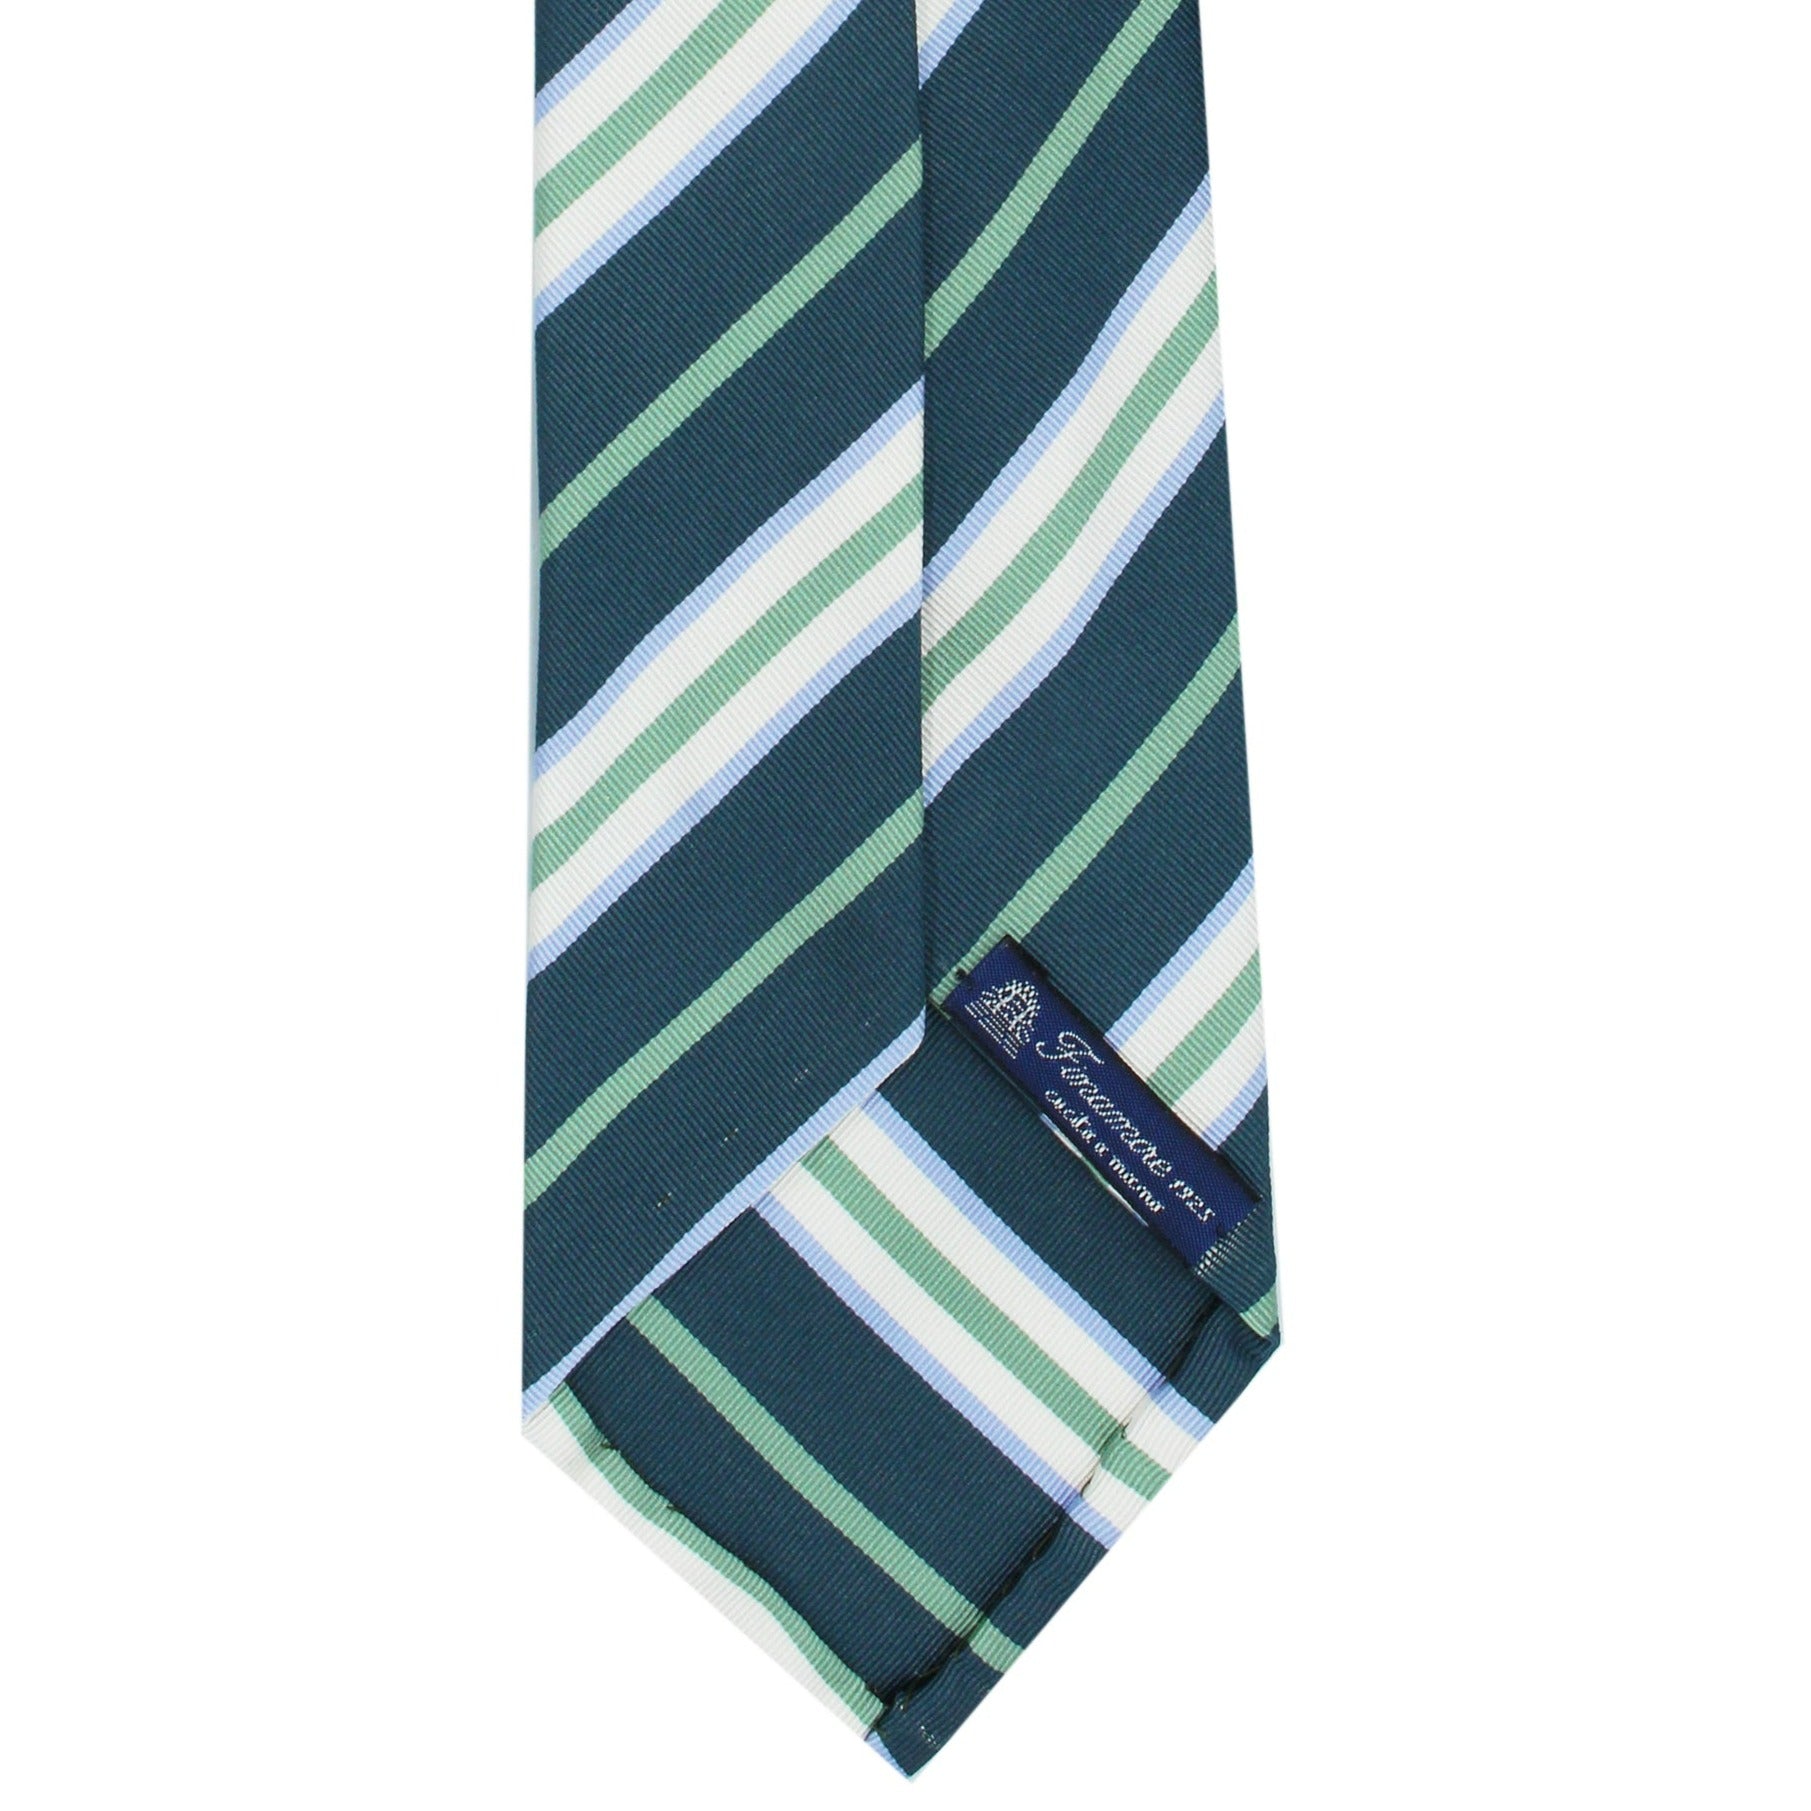 Chiaia Silk and Cotton tie with green, white and light blue stripes